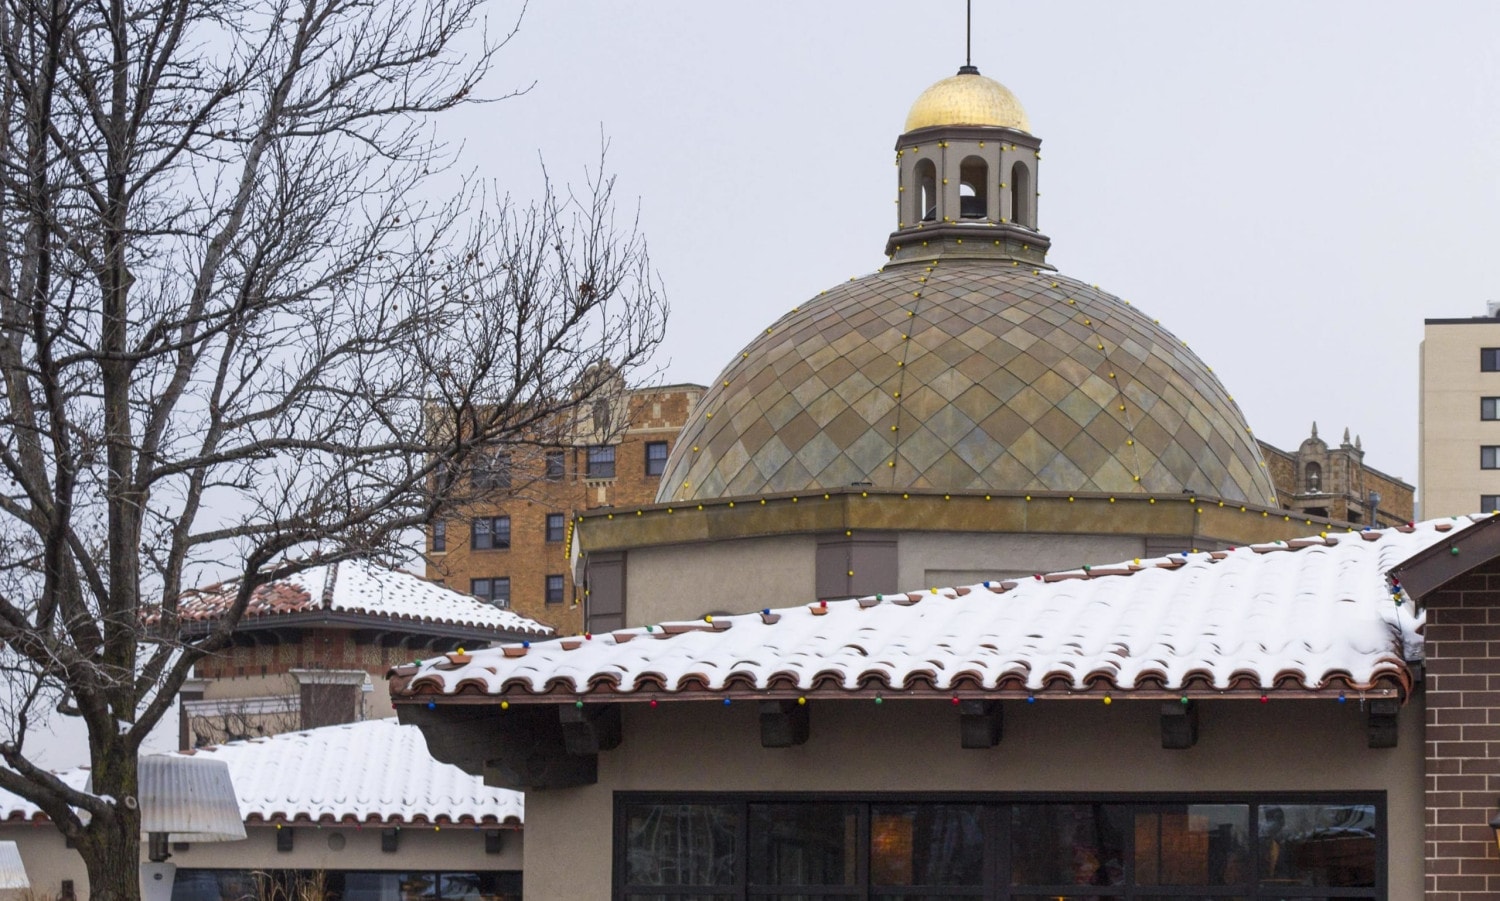 Photograph of the Dome on the Plaza after decade of aging.